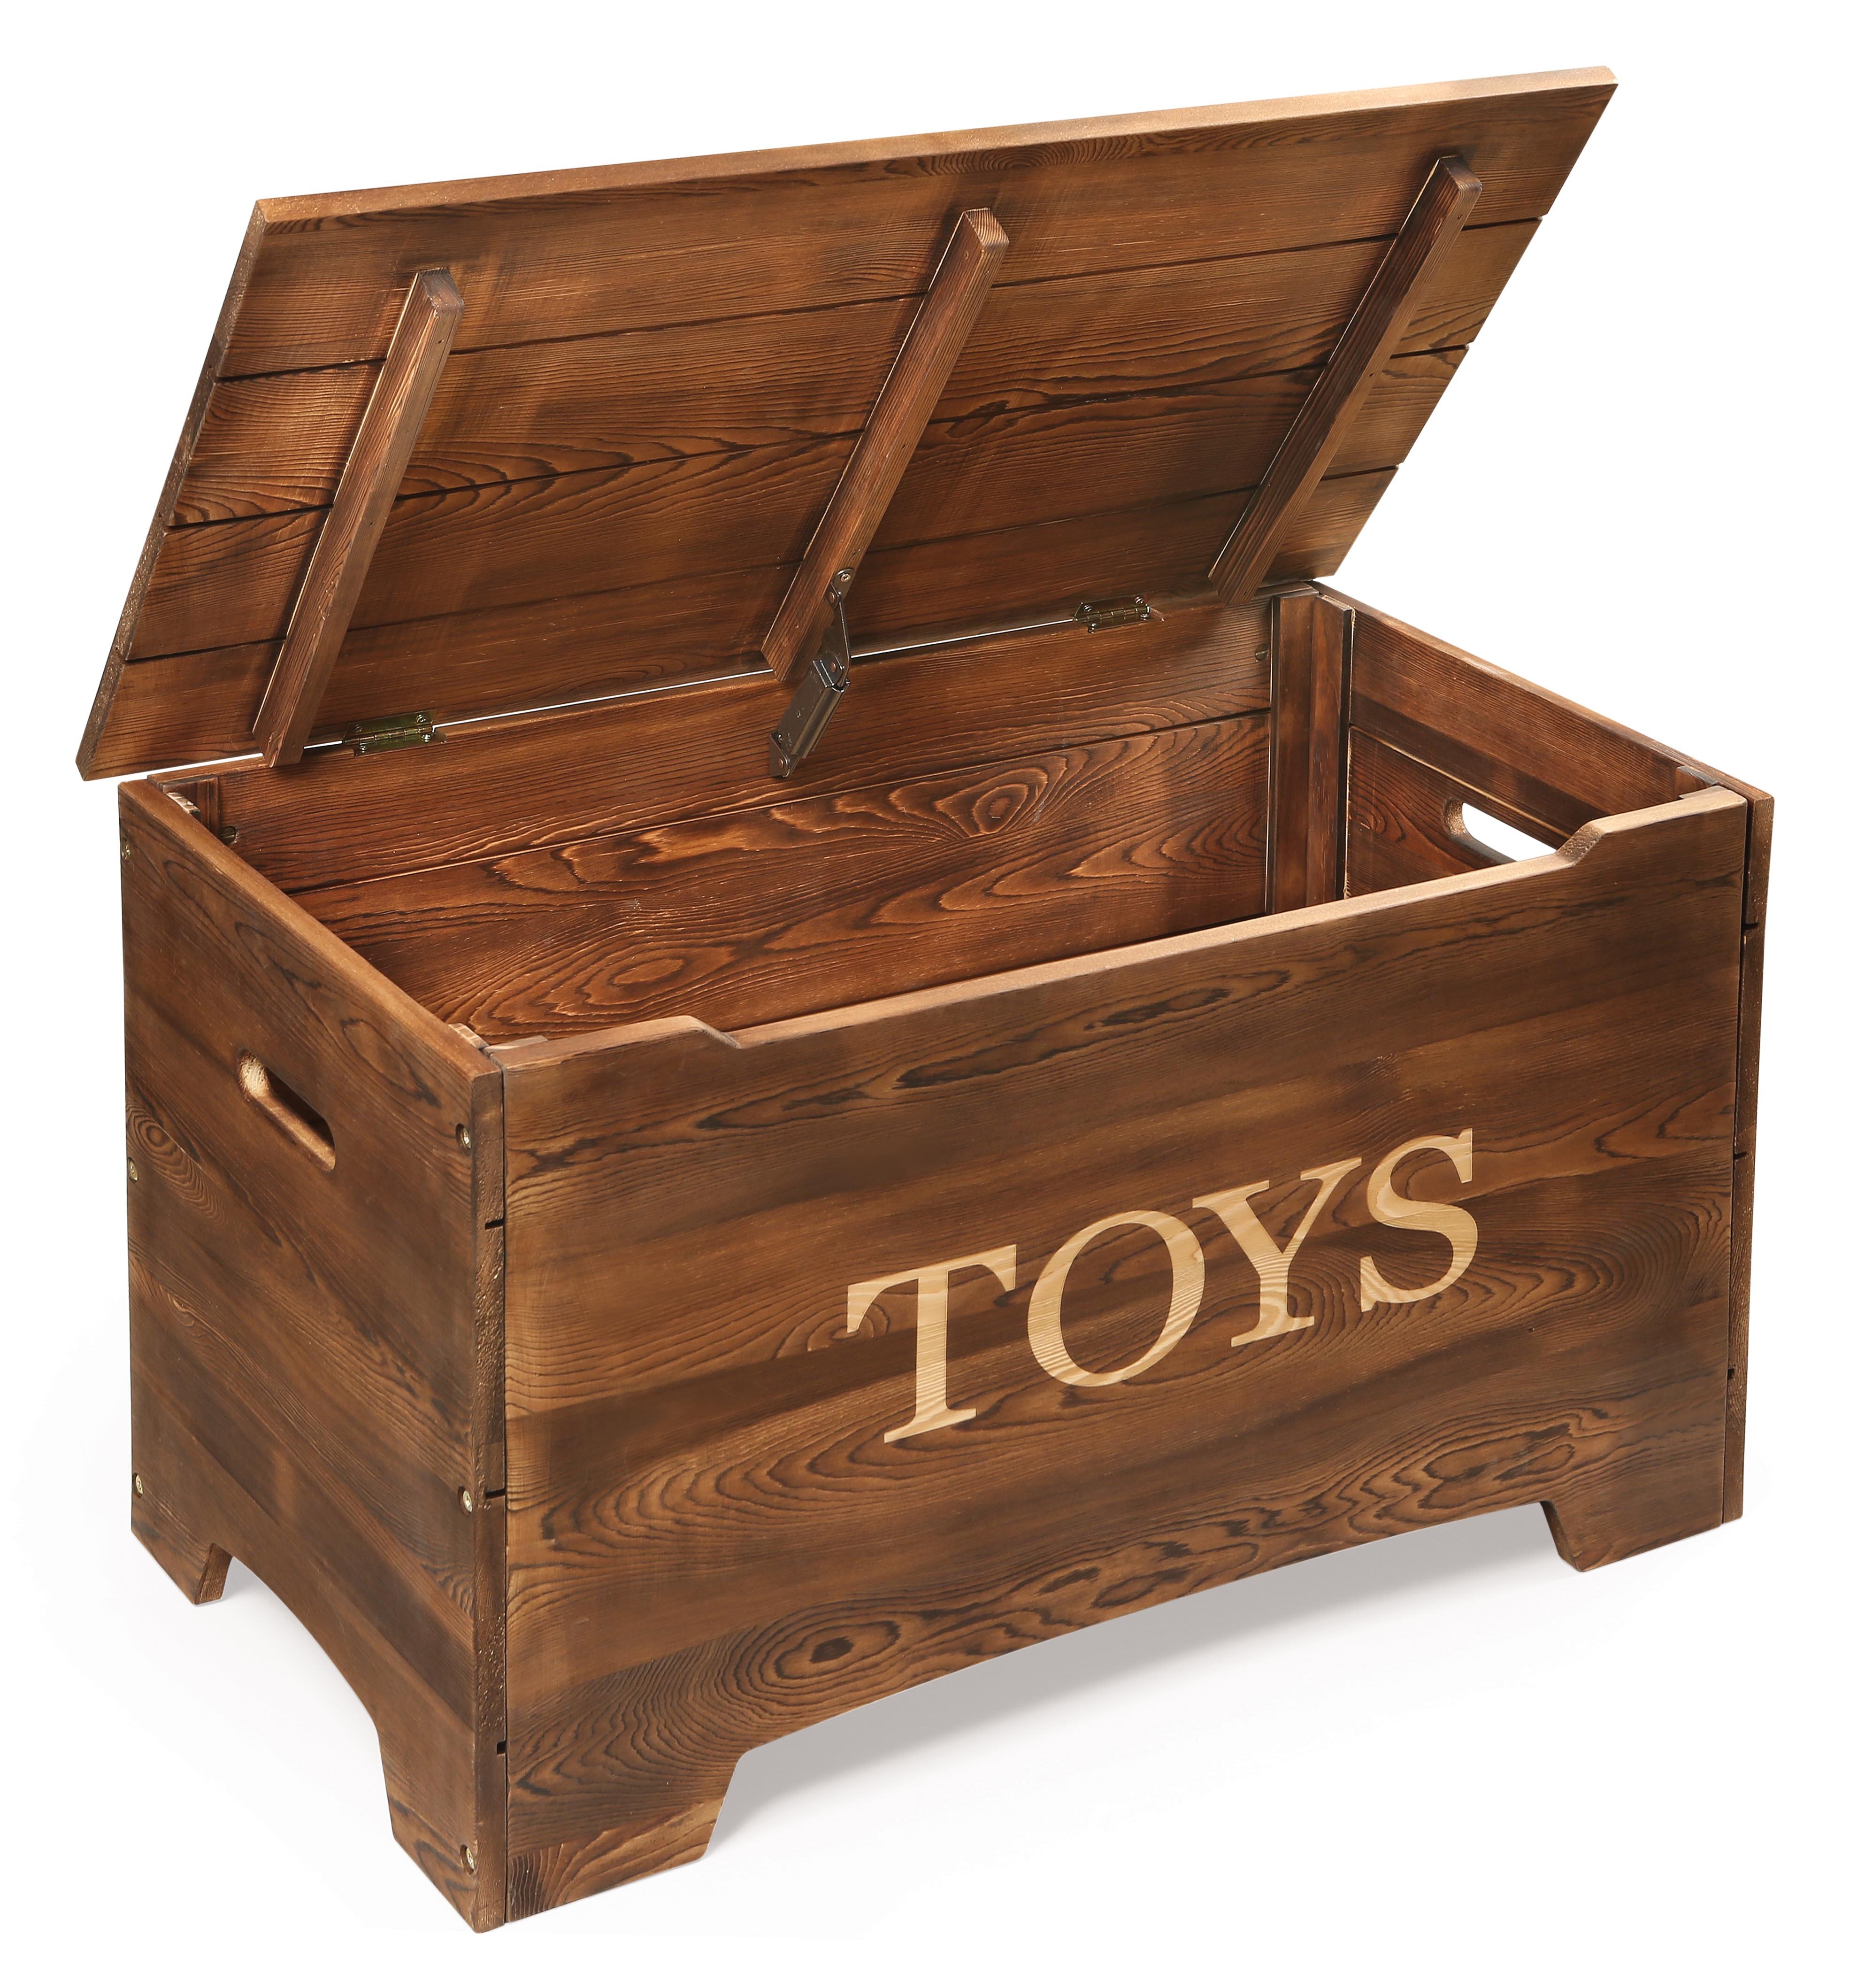 wooden toy chest on wheels